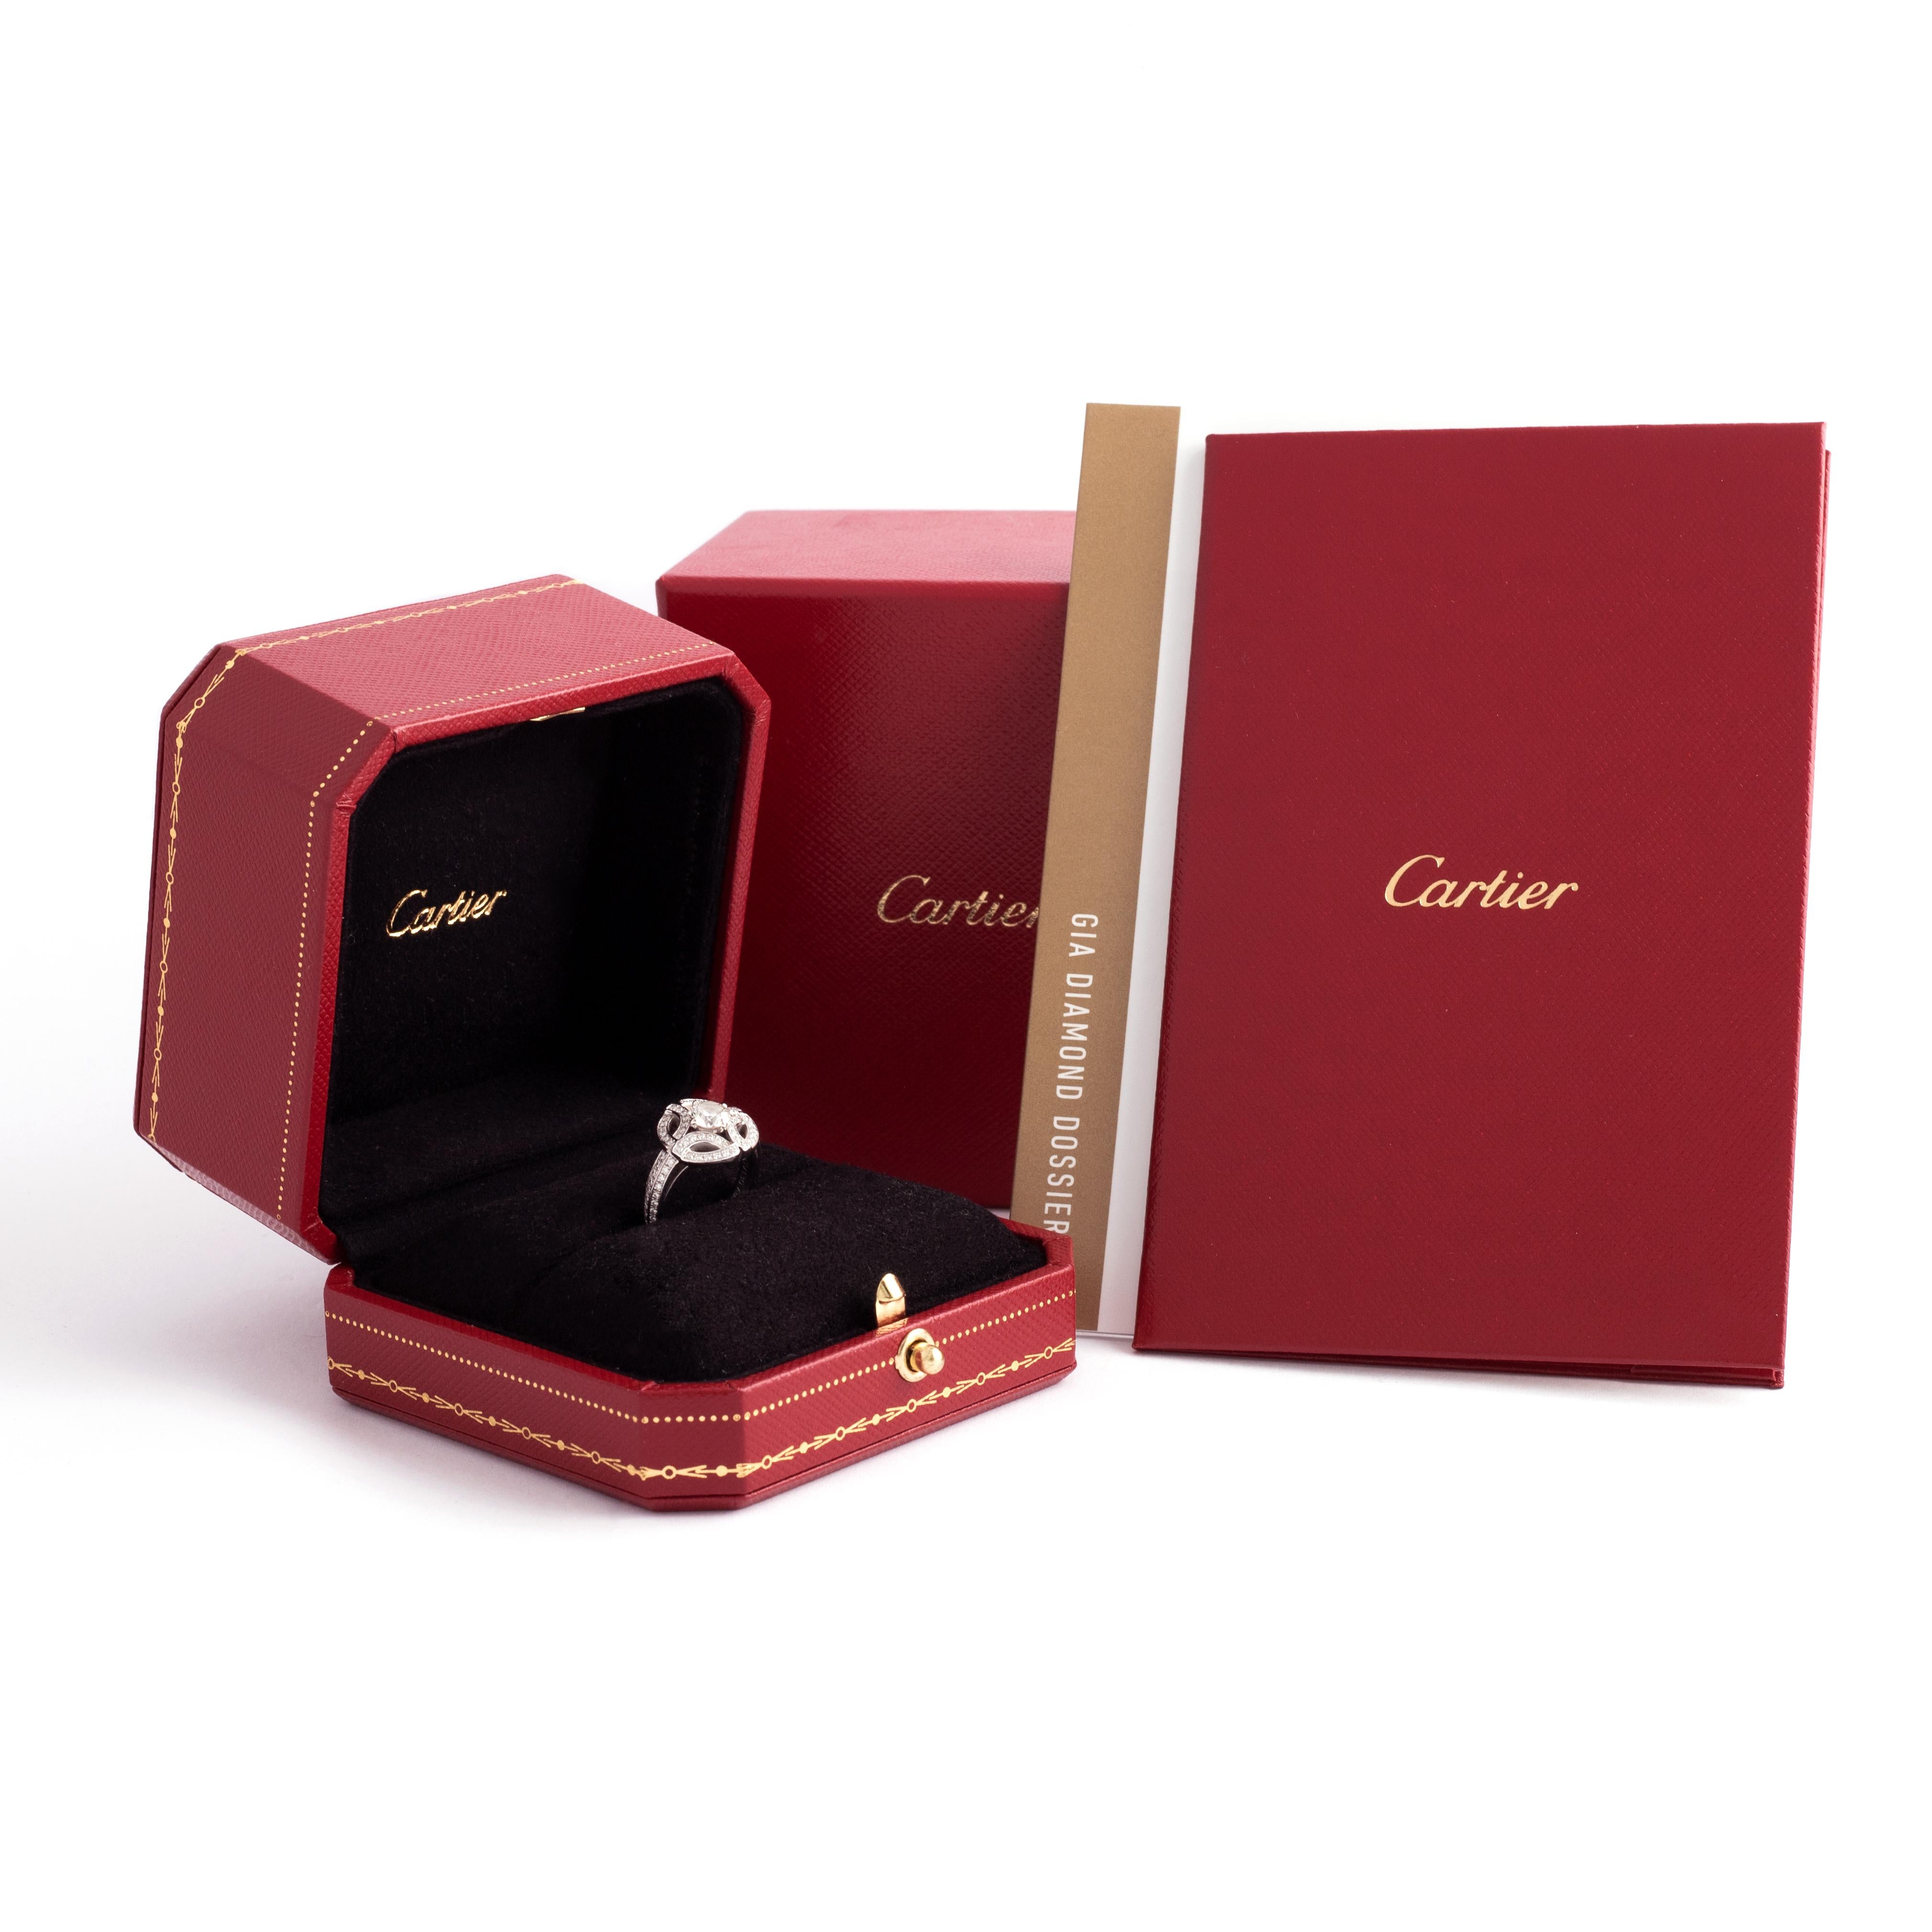 Cartier Galanterie collection Diamond White Gold 18K Ring.
Central diamond round cut, 0.57 carat, H color, Vs1 clarity, Ex, Ex, Ex, Faint fluorescence.
Signed Cartier, numbered.

Cartier original box and certificate.
Gia original certificate for